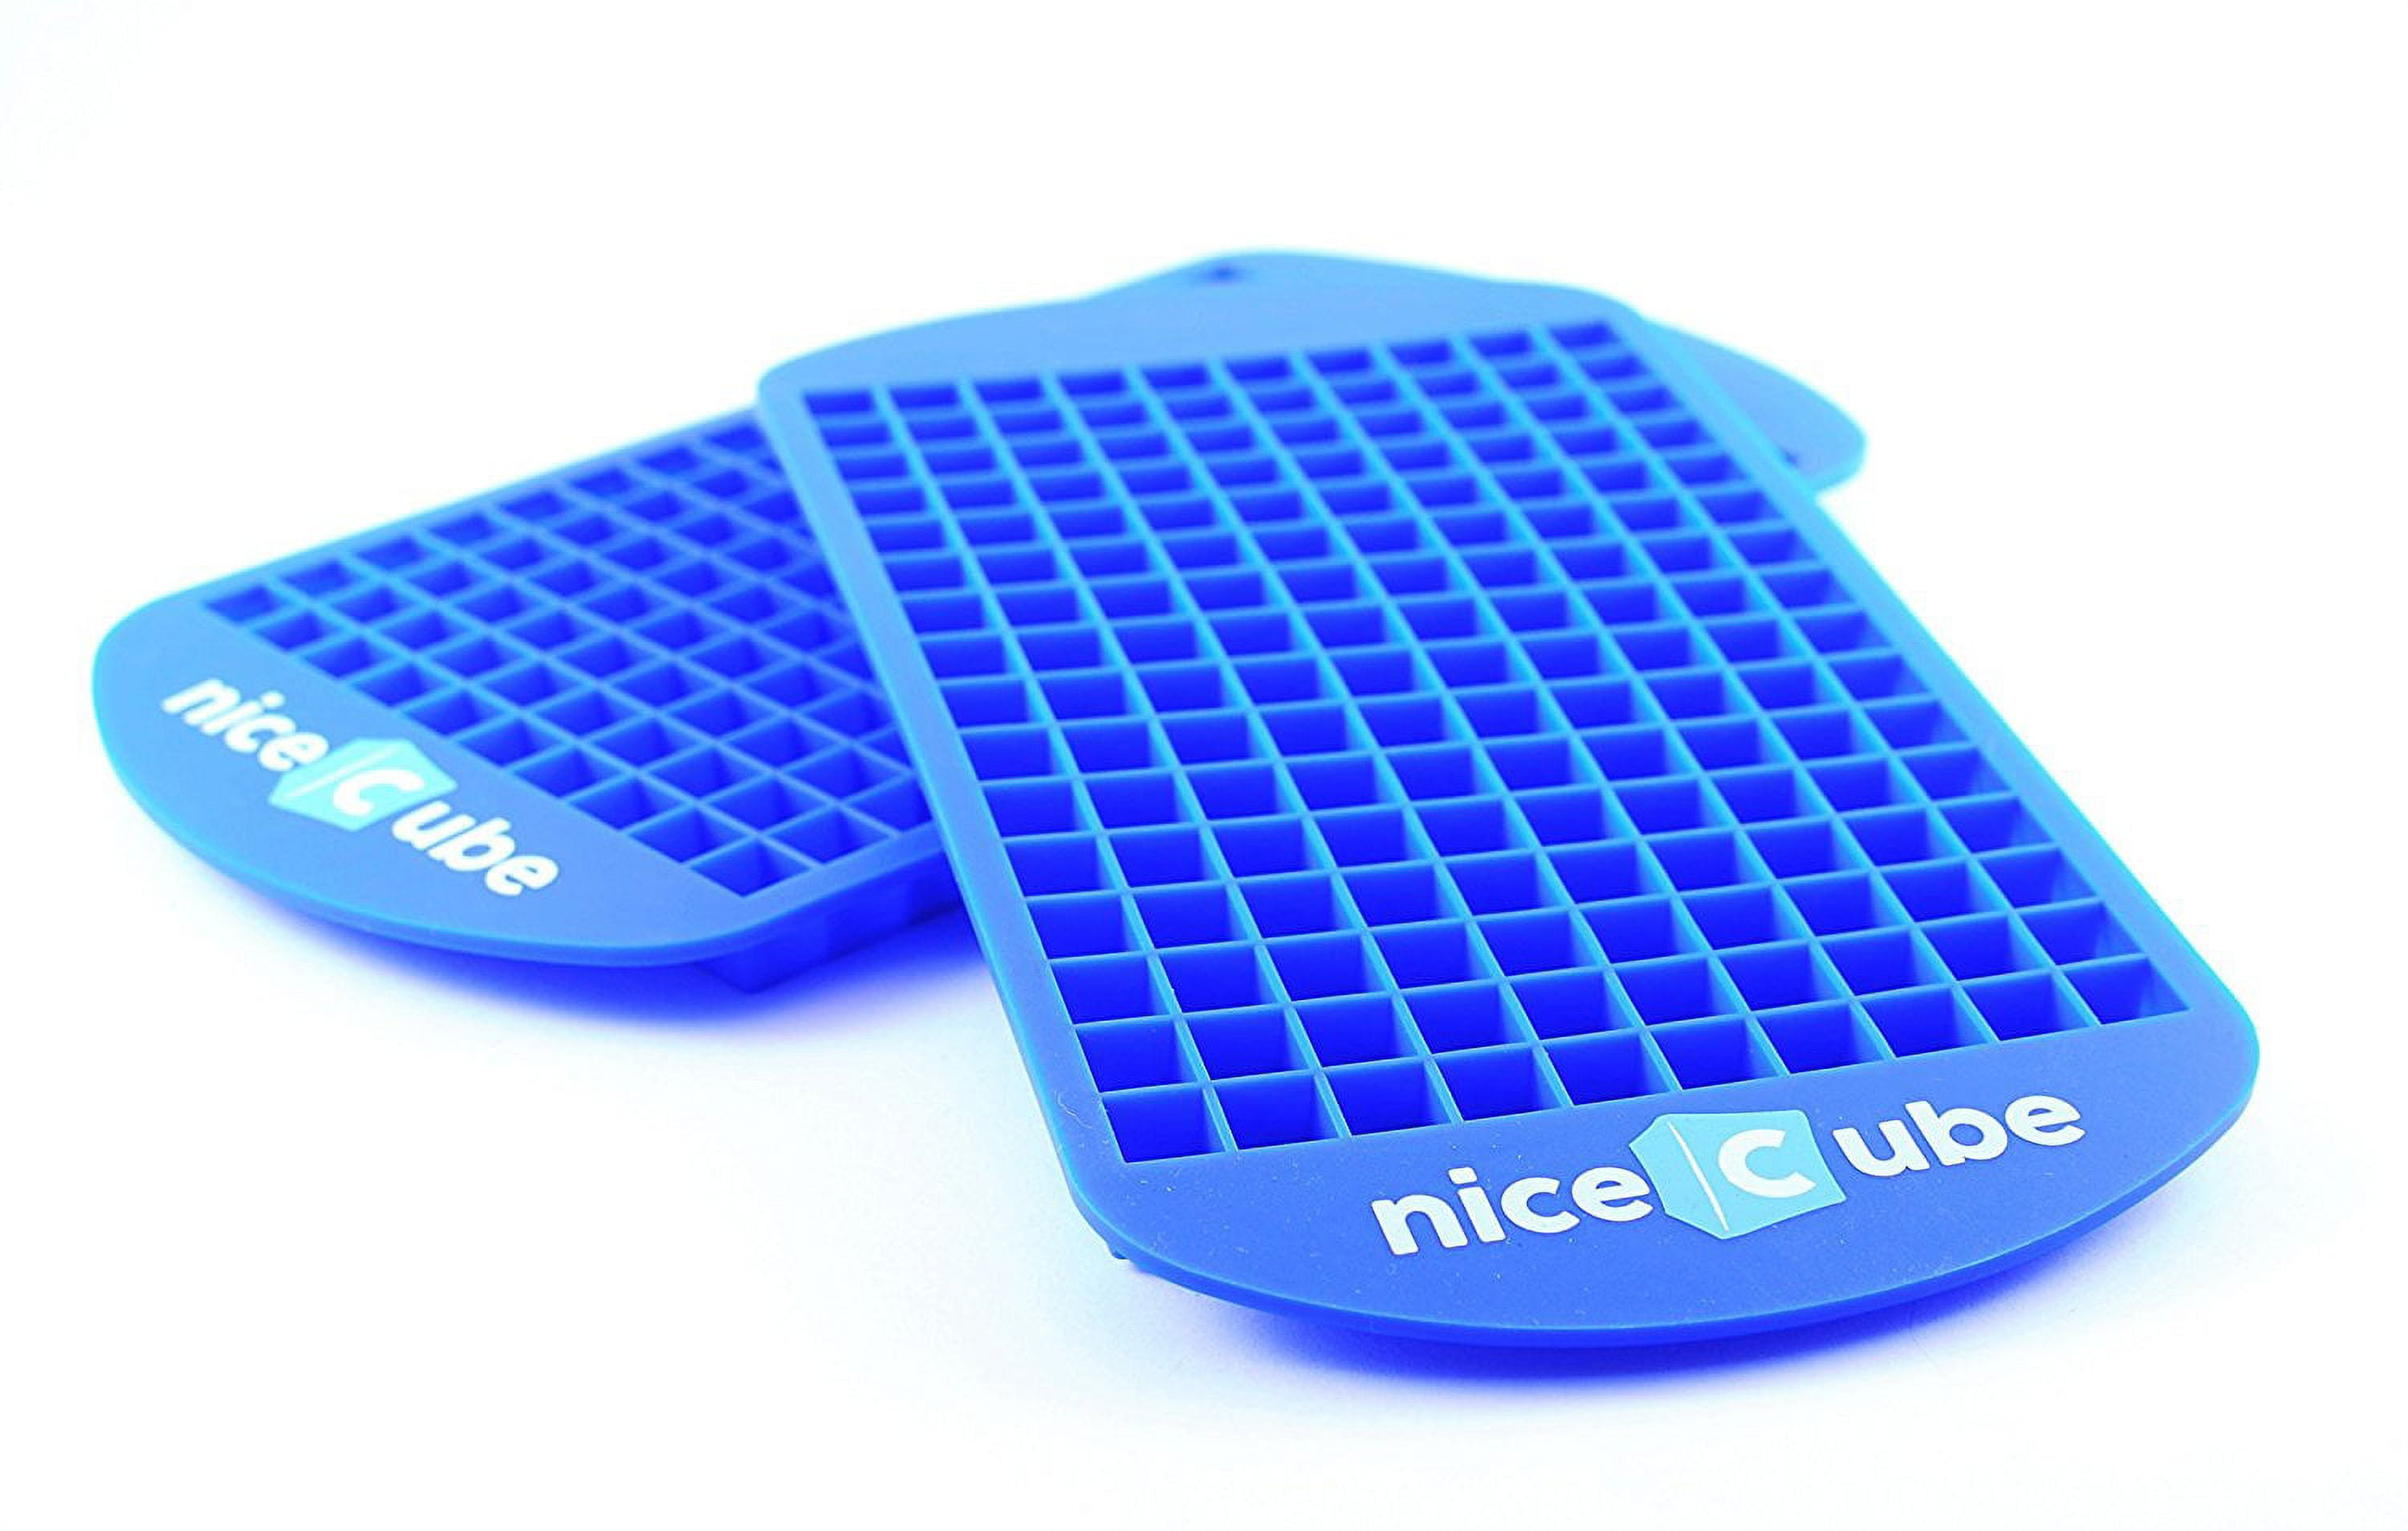 Silicone Ice Cube Trays by niceCube, Each Tray Makes 160 Mini